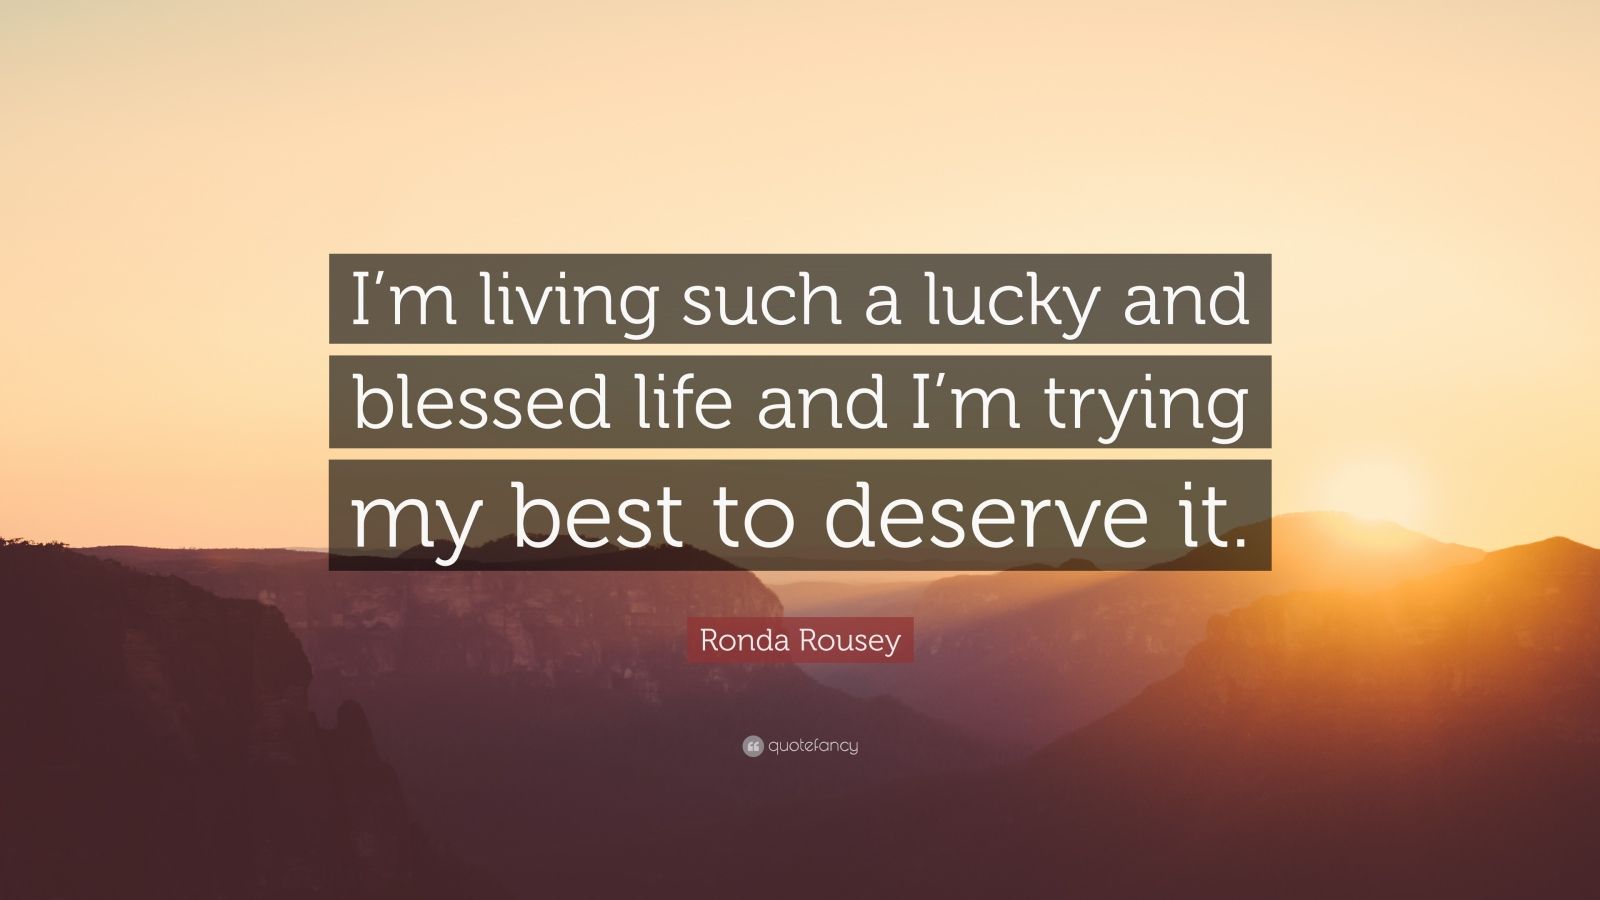 Ronda Rousey Quote “I’m living such a lucky and blessed